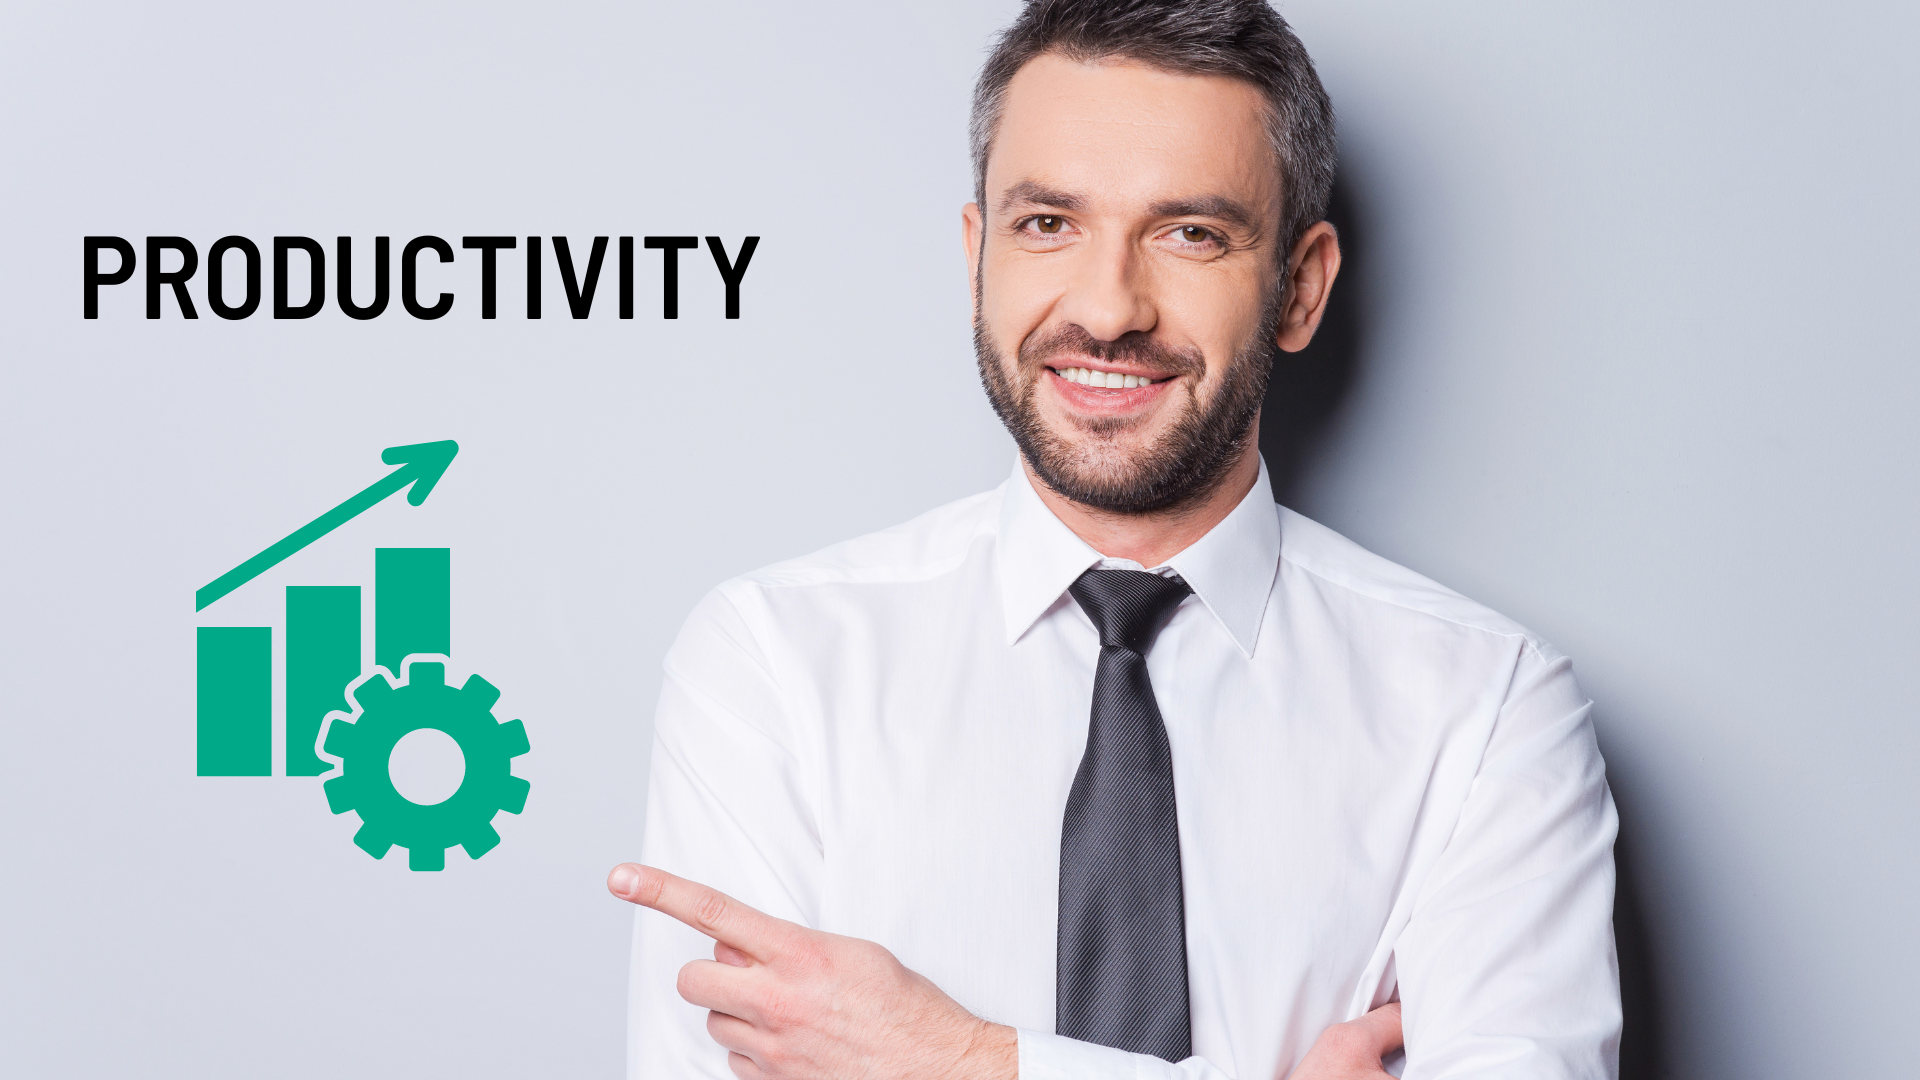 How can ChatGPT increase your productivity?